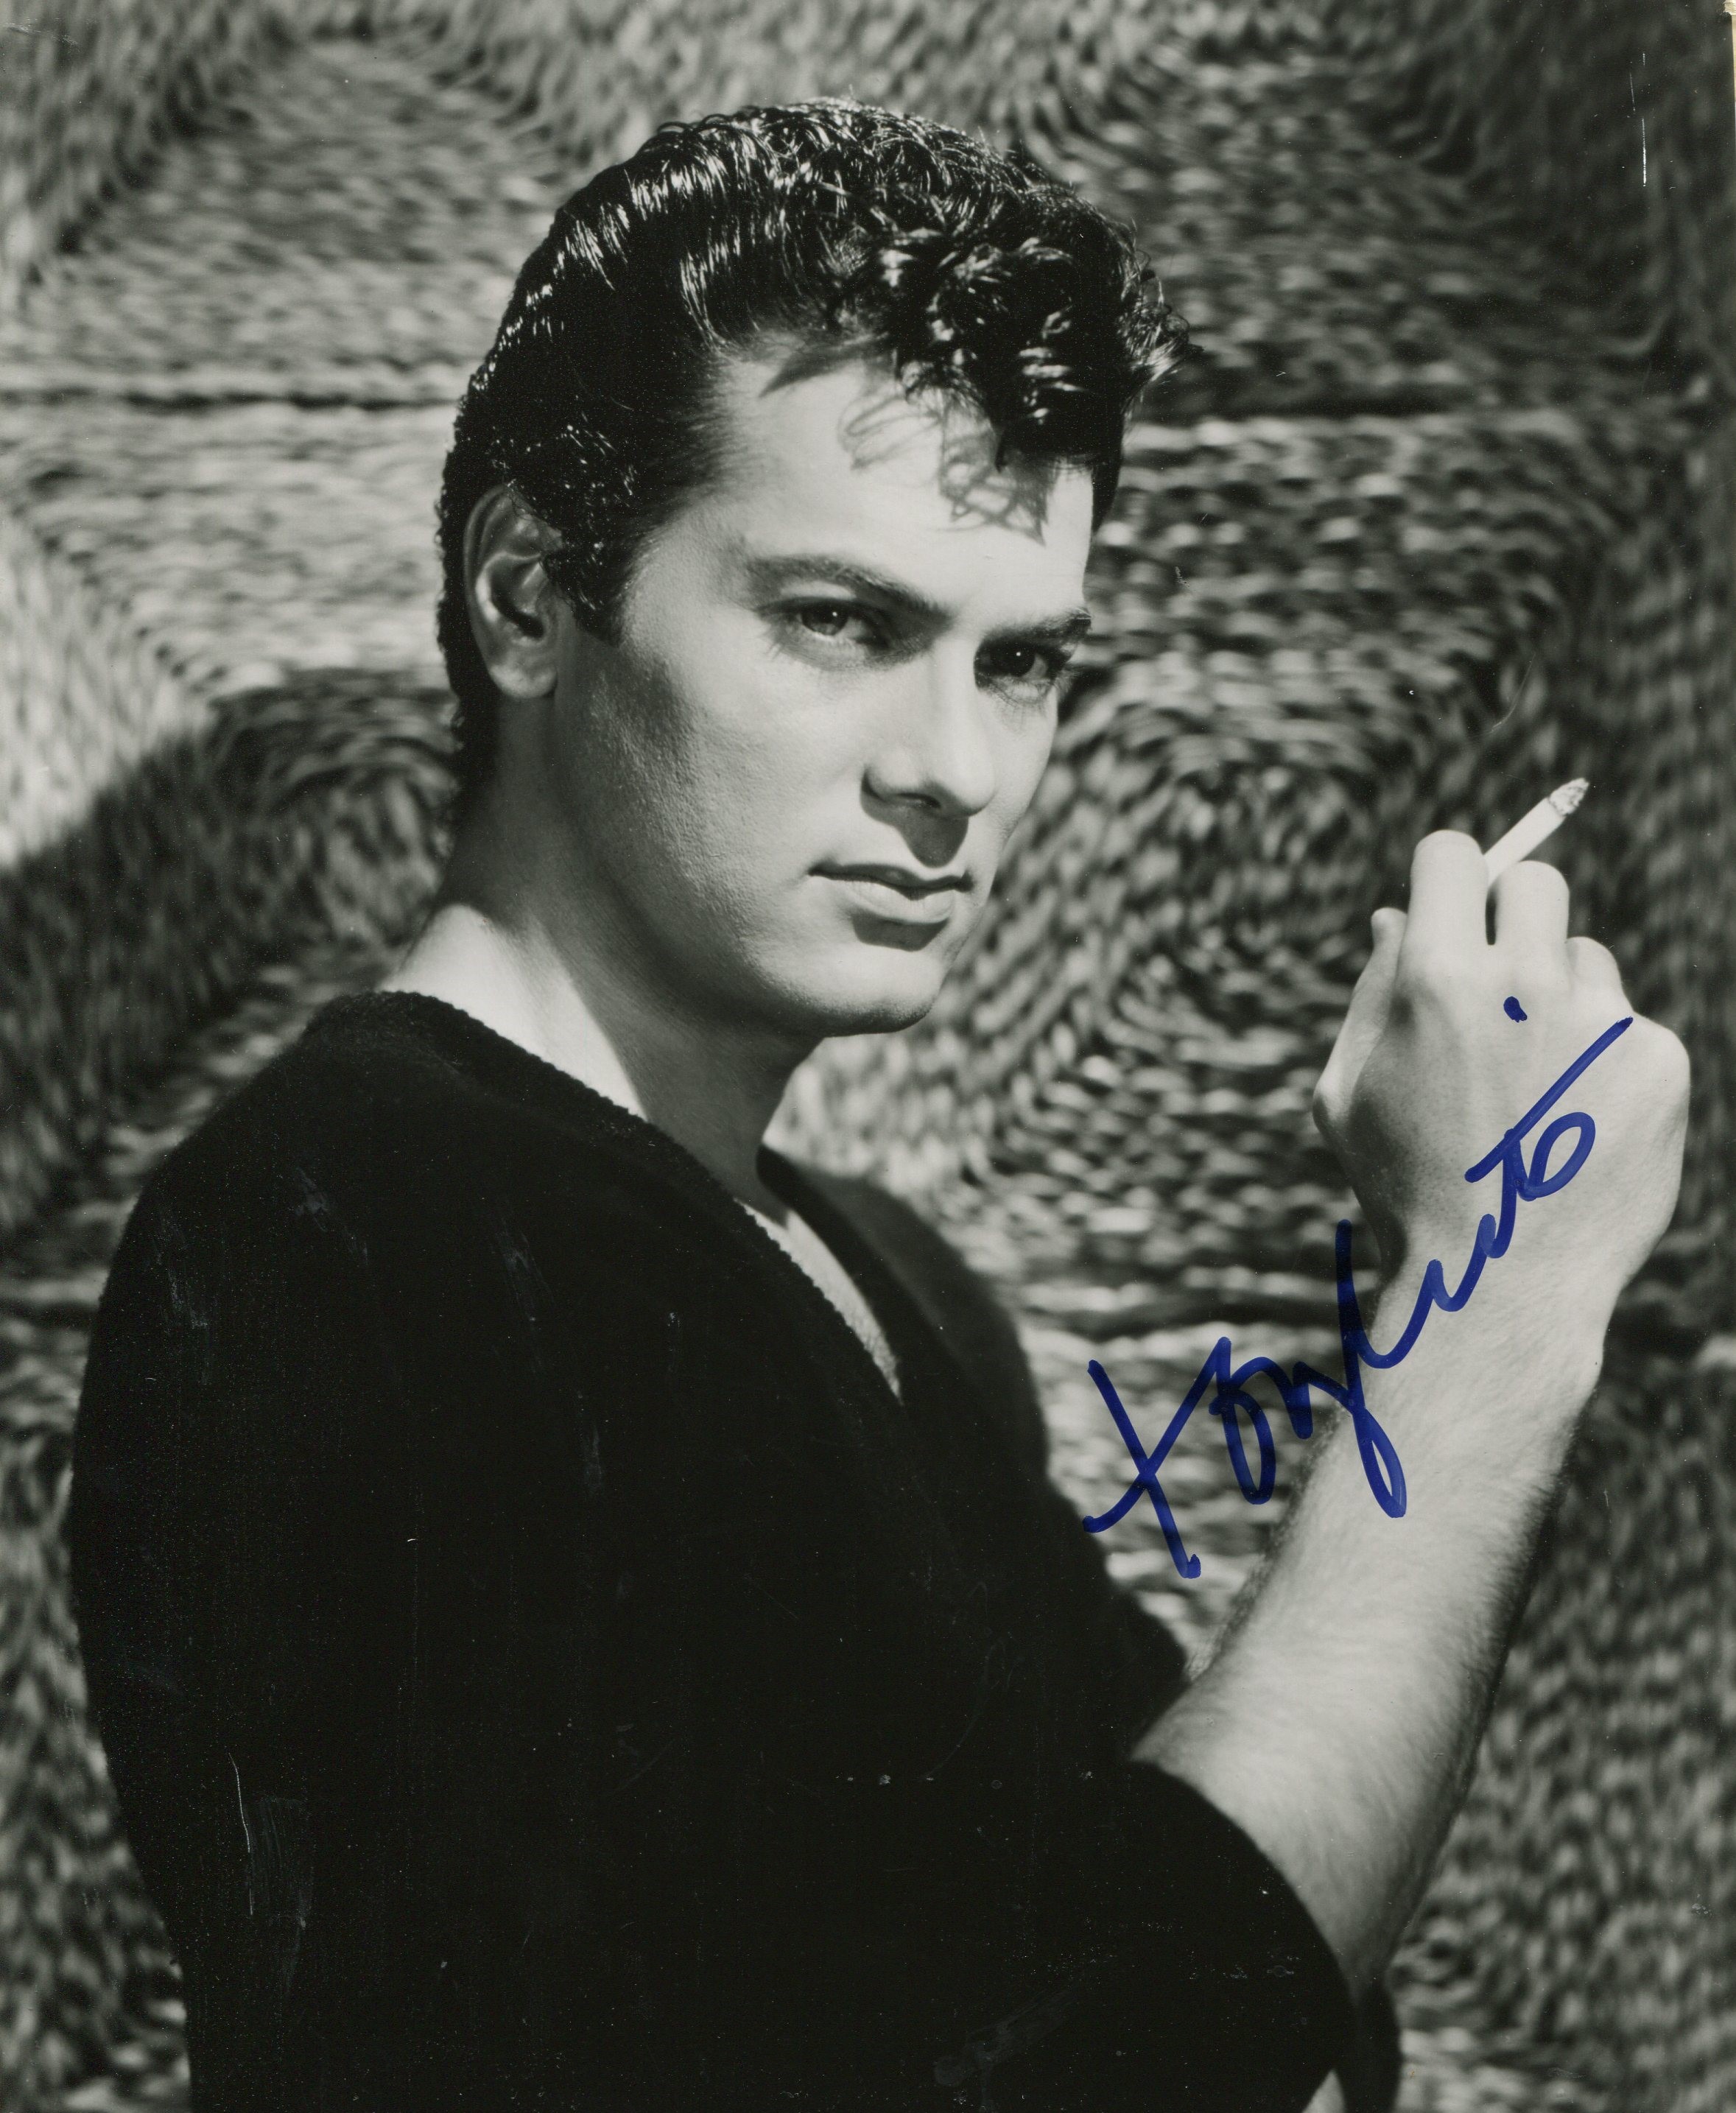 Tony Curtis – Movies & Autographed Portraits Through The Decades